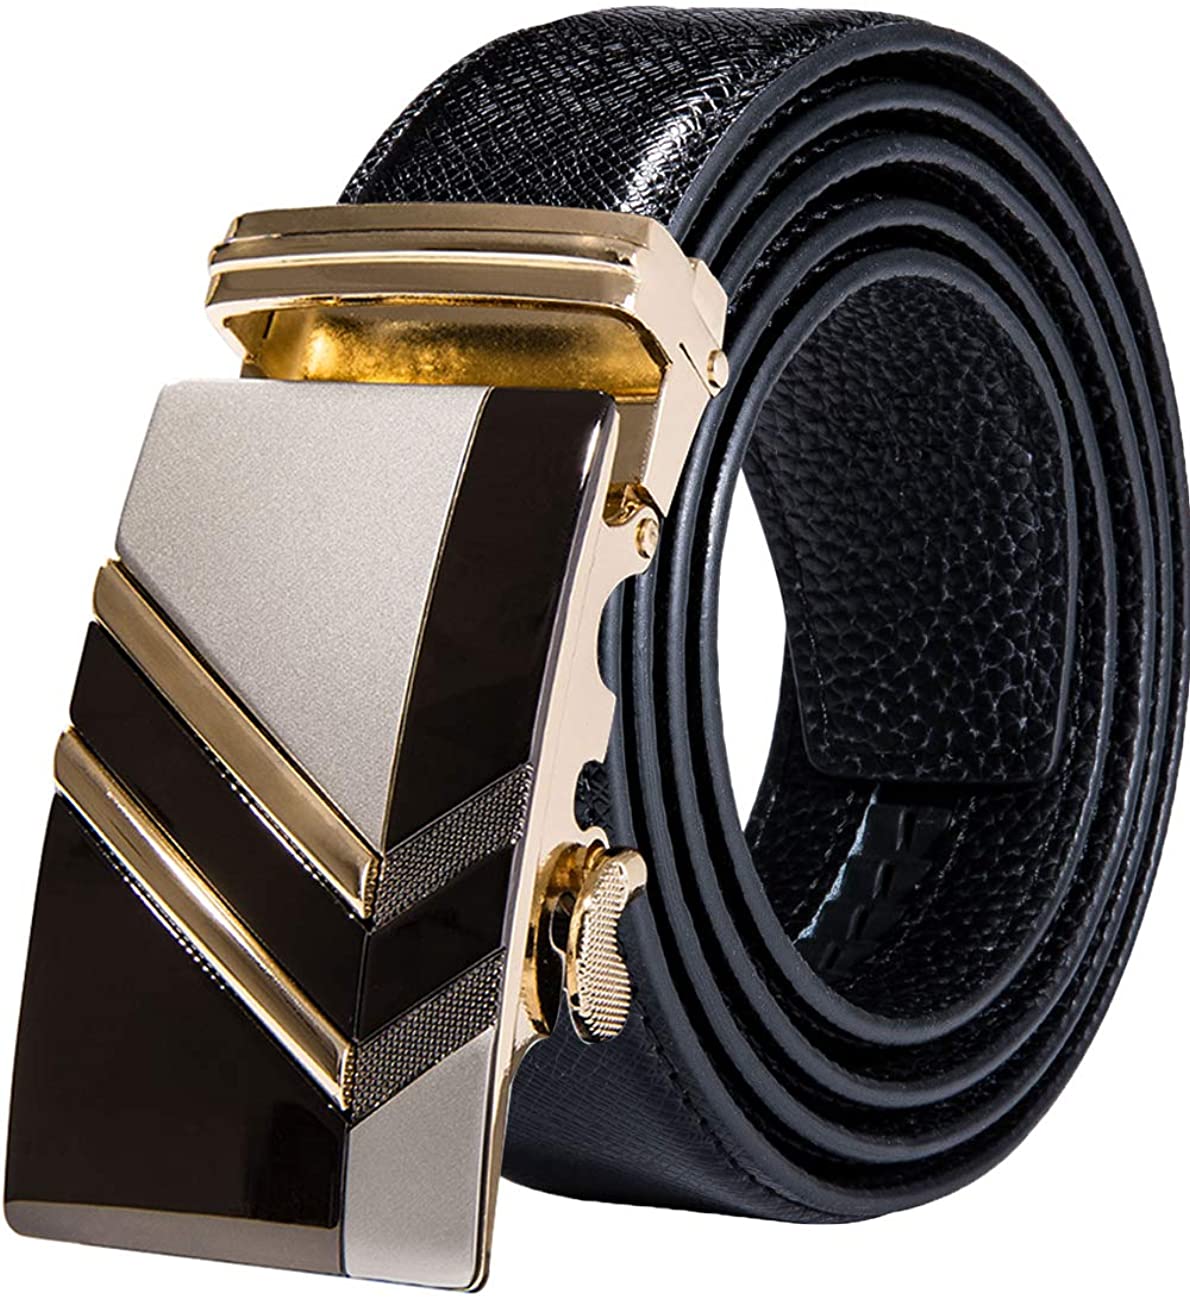 Barry.Wang Mens Ratchet Belt,Genuine Leather Belt with Automatic Buckle ...